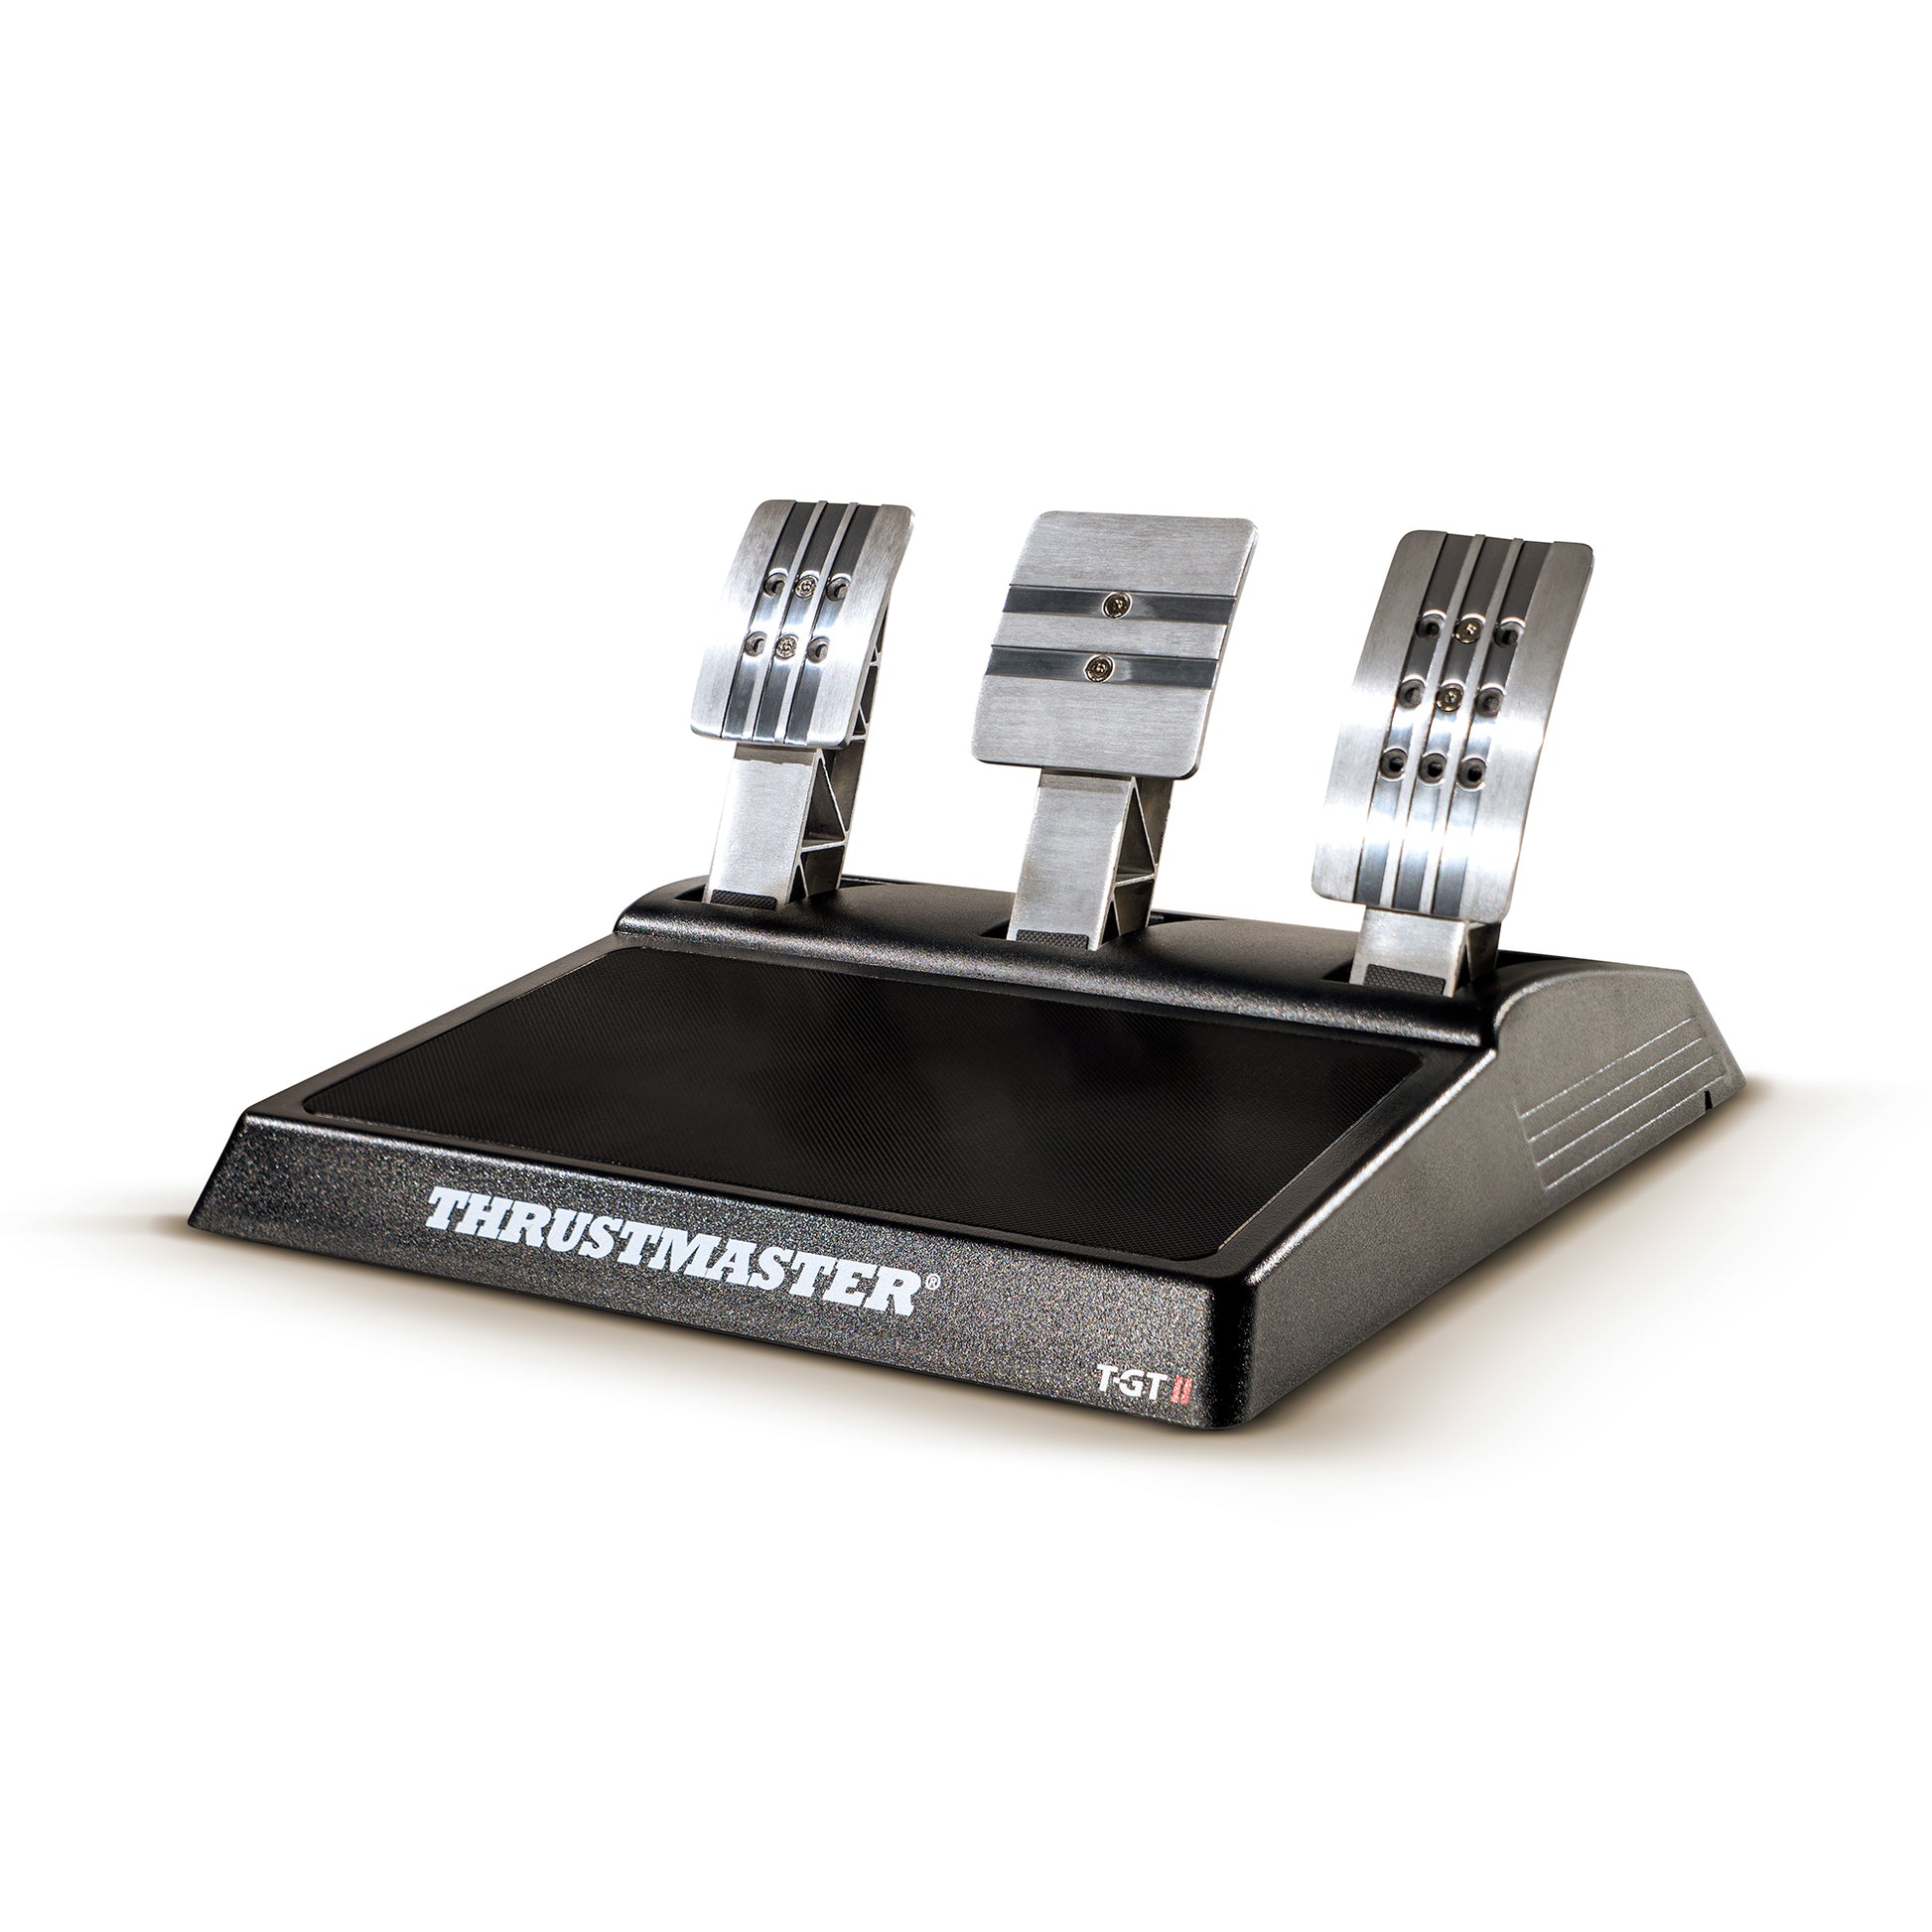 Thrustmaster T-GT II Racing Wheel & Pedals — G-Force Gaming